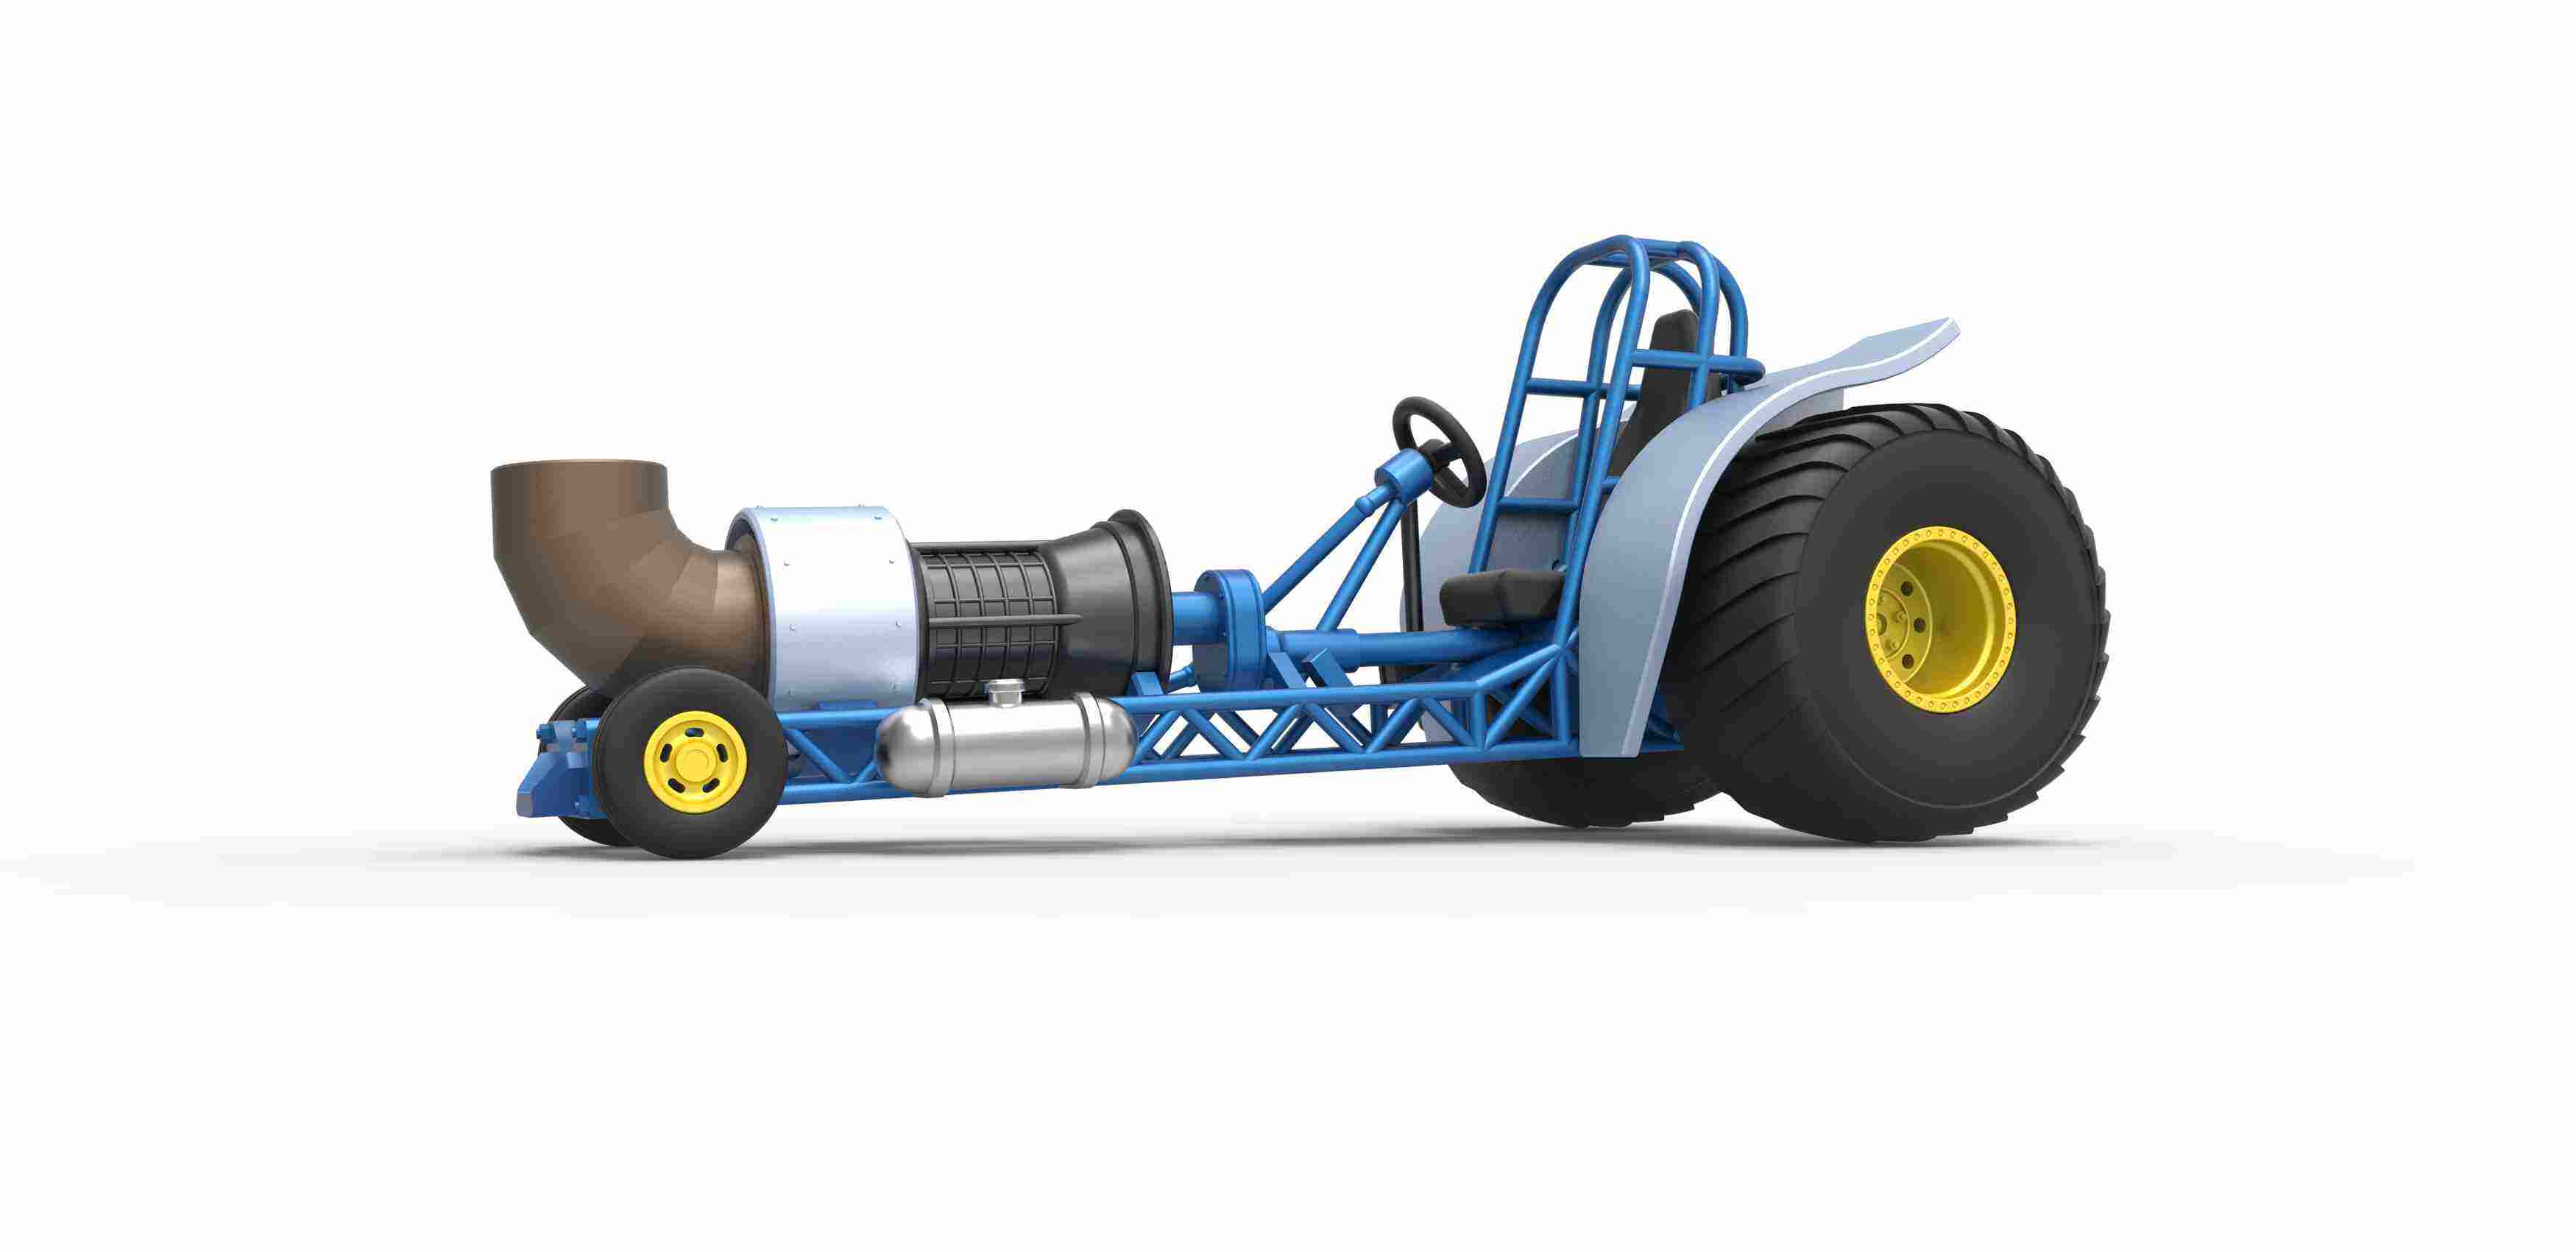 Mini Rod pulling tractor with jet engine V2 Scale 1:25, 3D models download